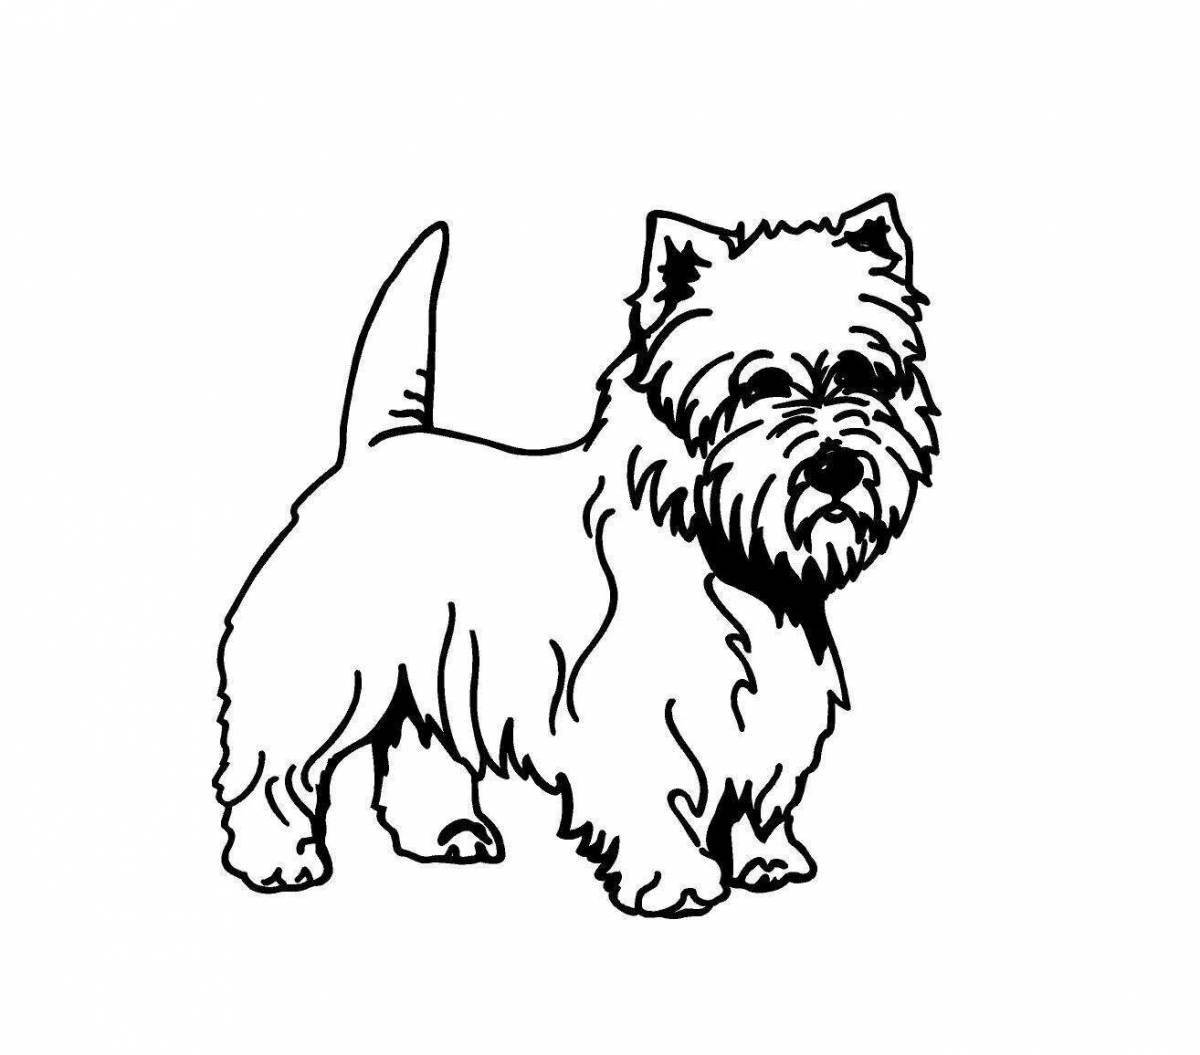 Coloring book smart yorkshire terrier